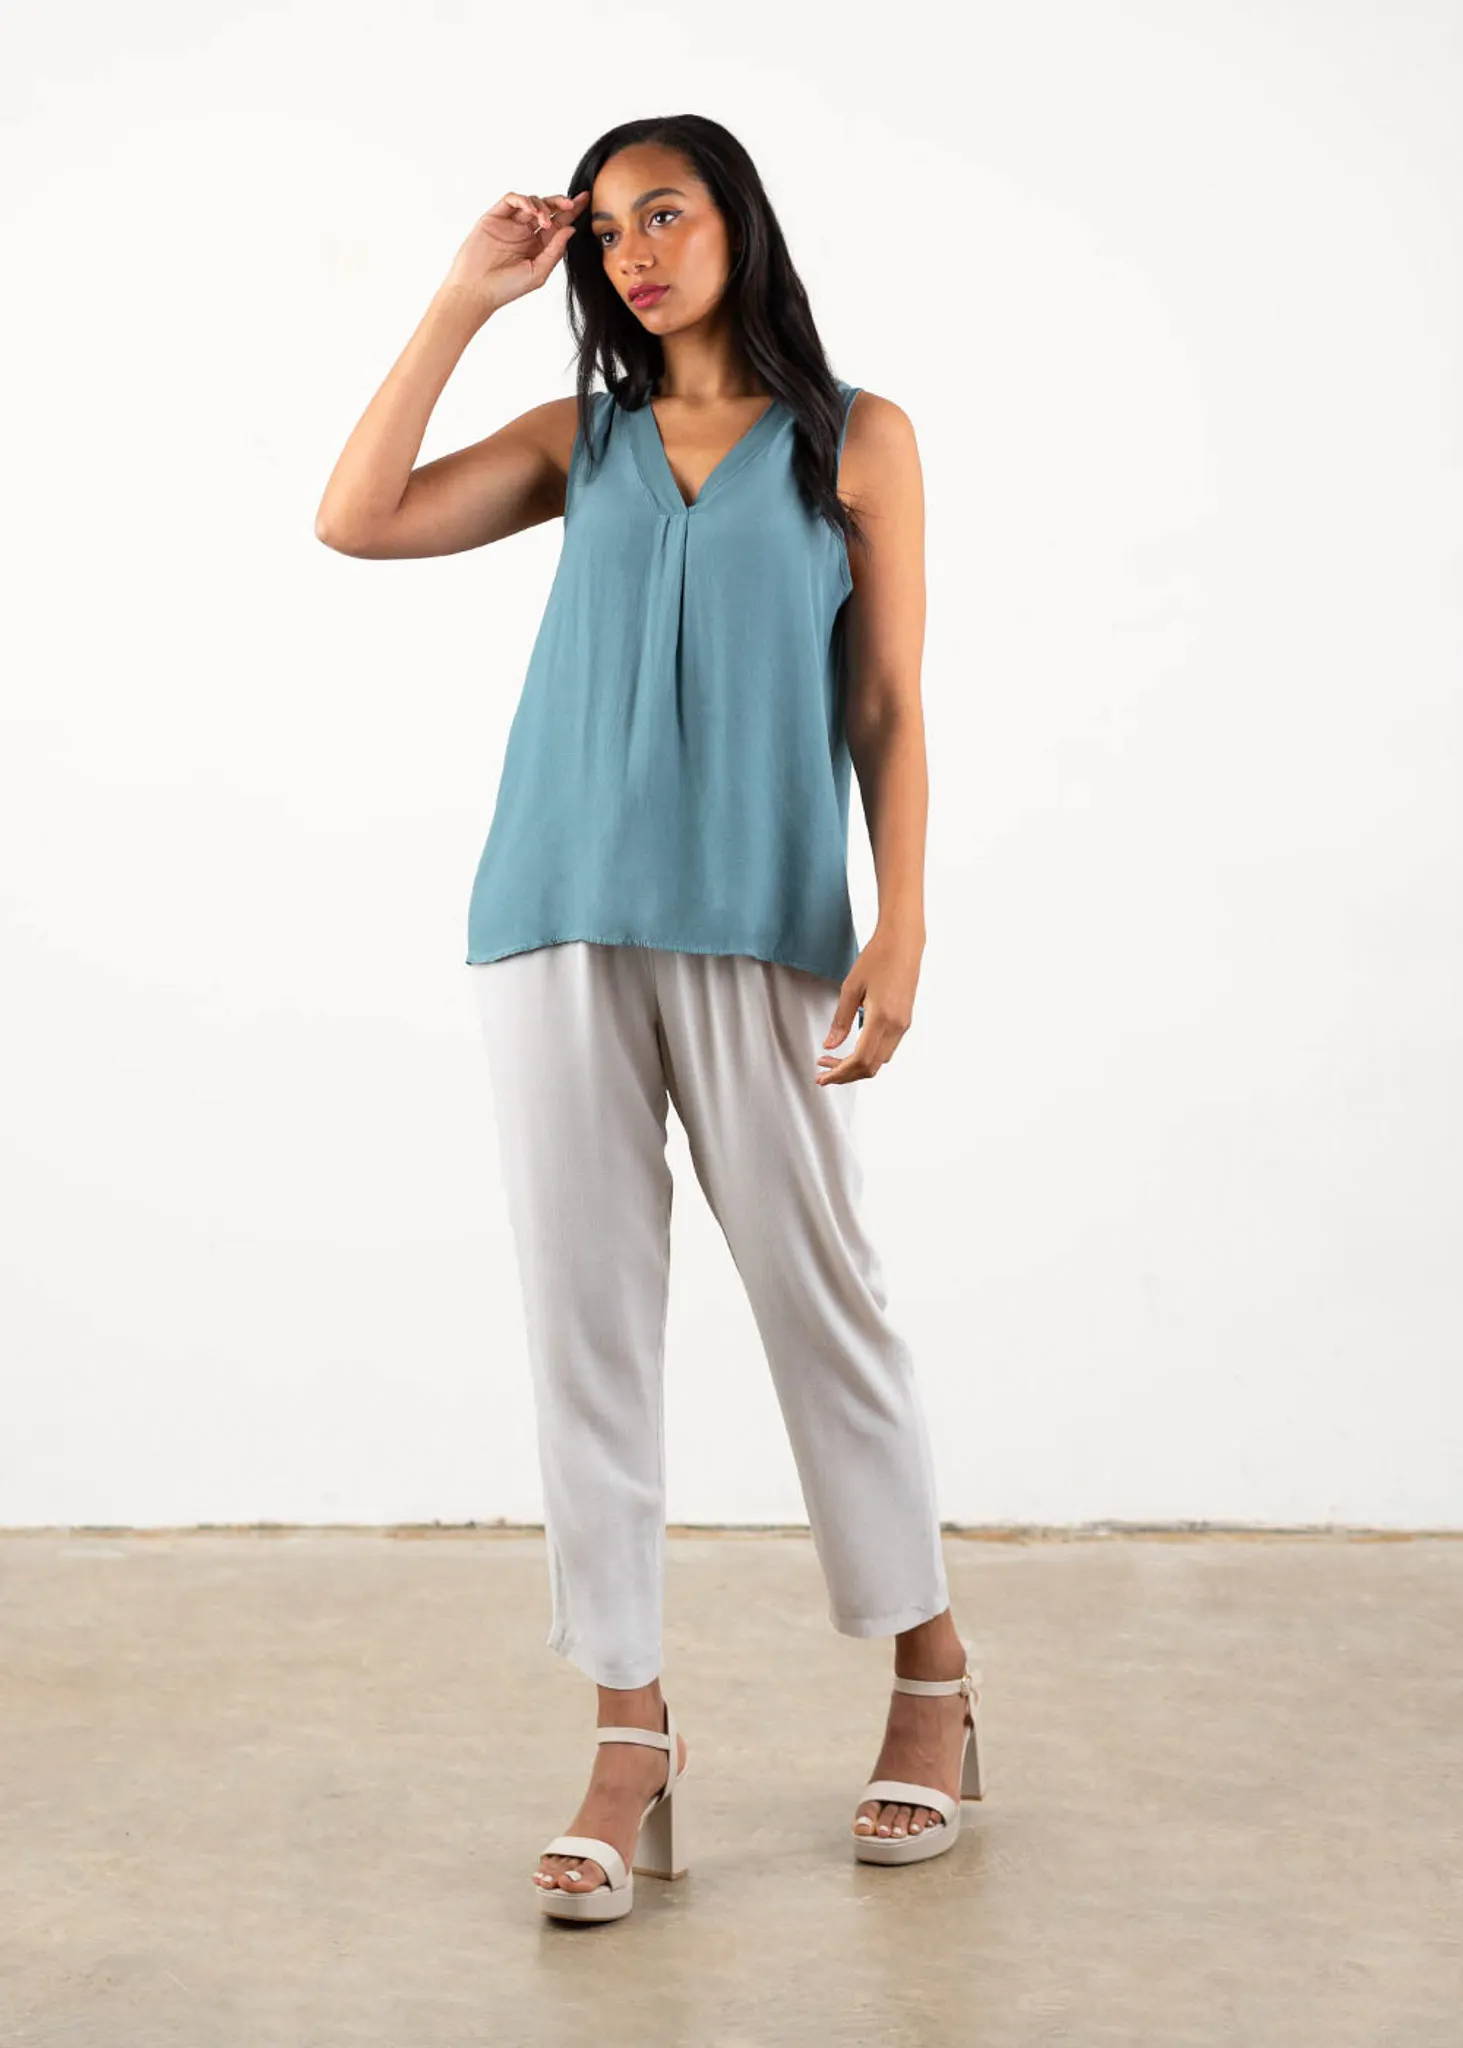 A model wearing a blue grey v neck sleeveless top with  oatmeal coloured trousers and off white heels